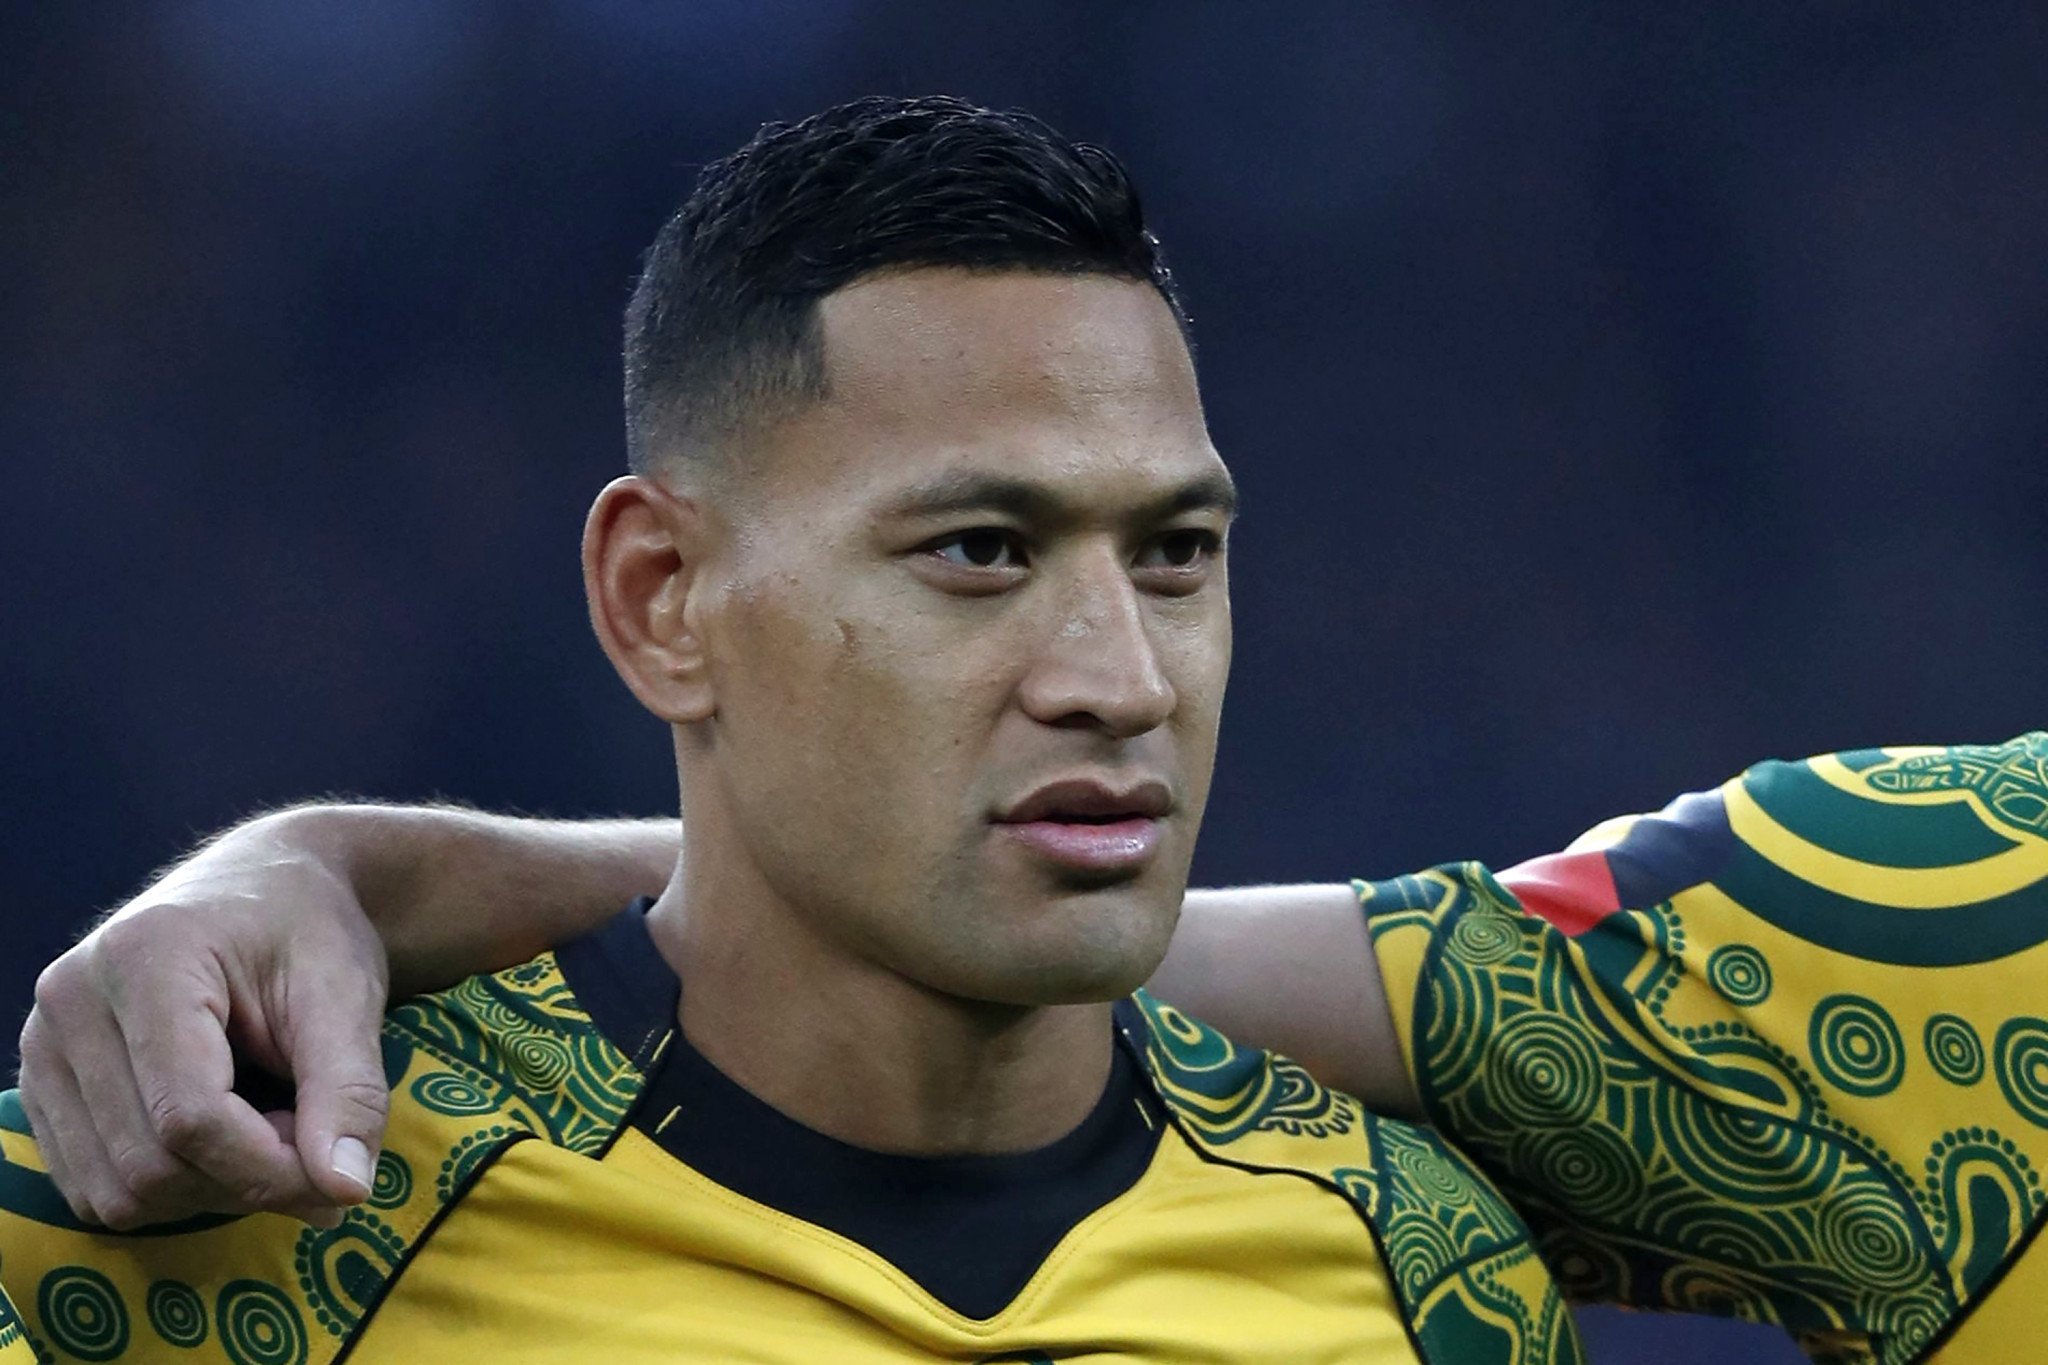 Folau to challenge Rugby Australia sacking for anti-gay comments